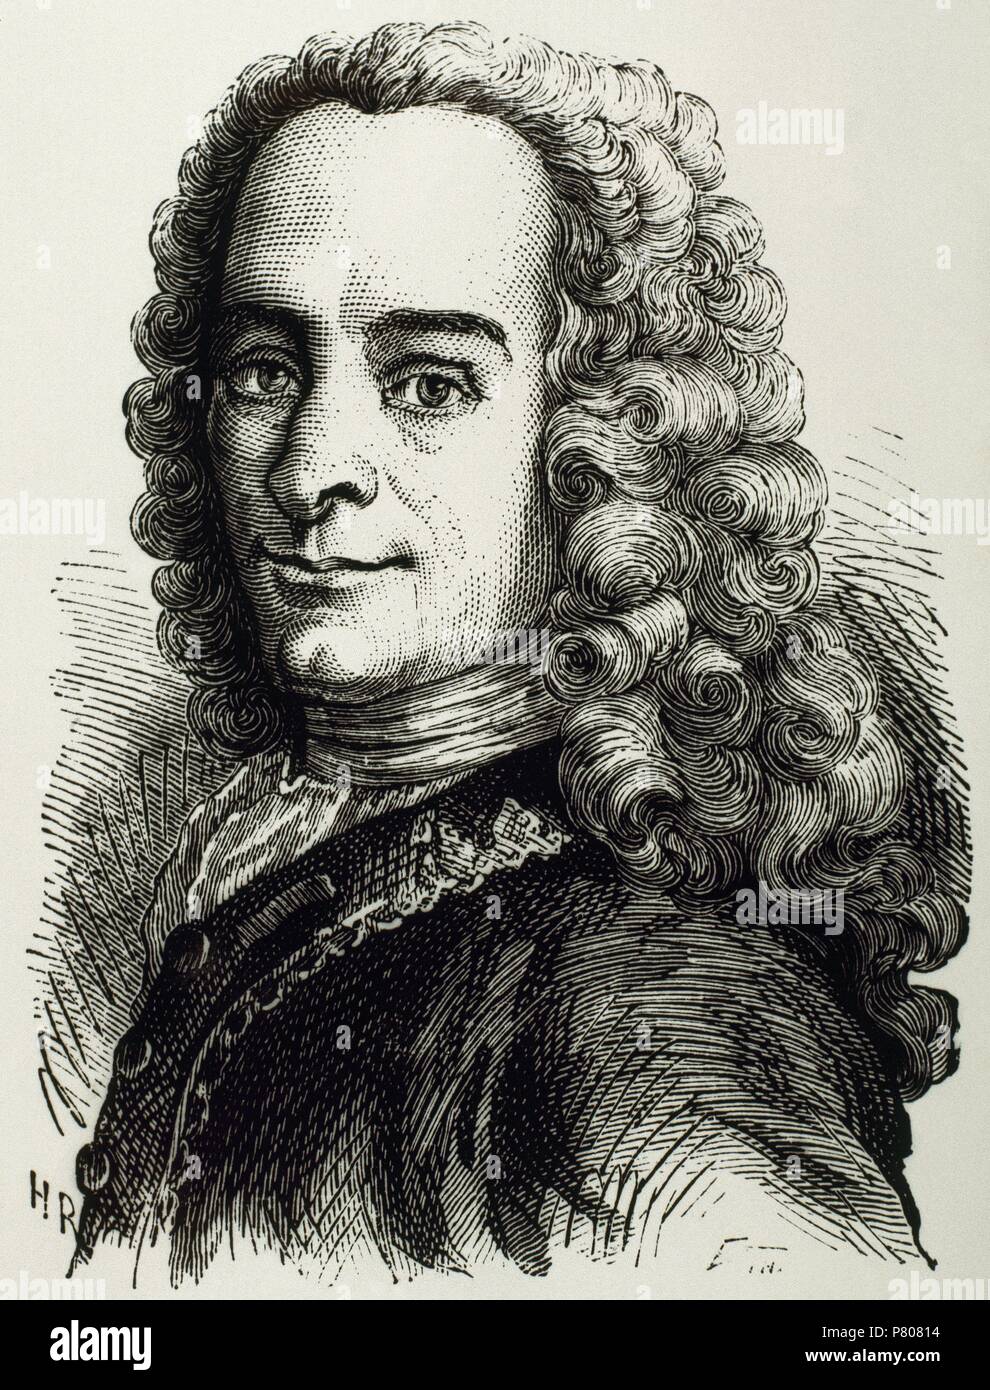 Voltaire (Franc ois-Marie Arouet) (1694-1778). French writer of The Enlightenment. Portrait. Engraving. Stock Photo